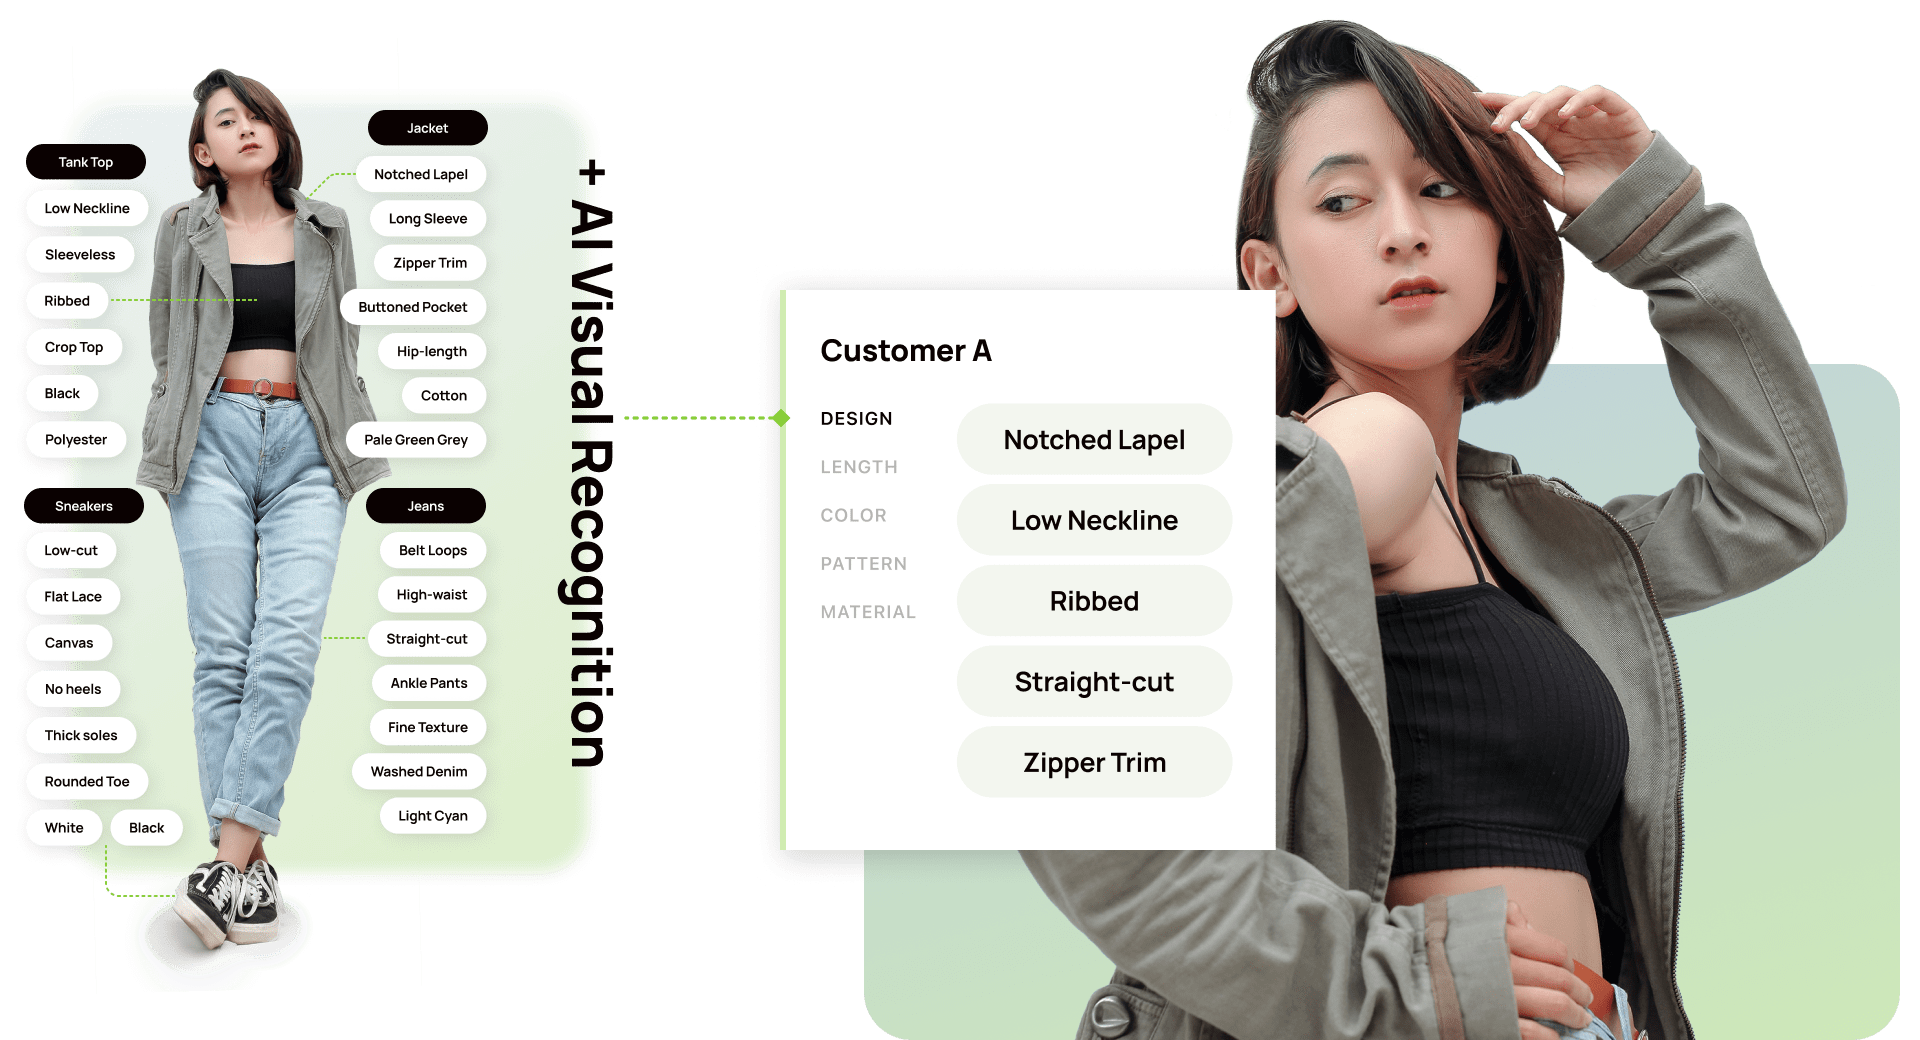 AI Visual Recognition mockup showing a fashionable girl and tags that match her outfit